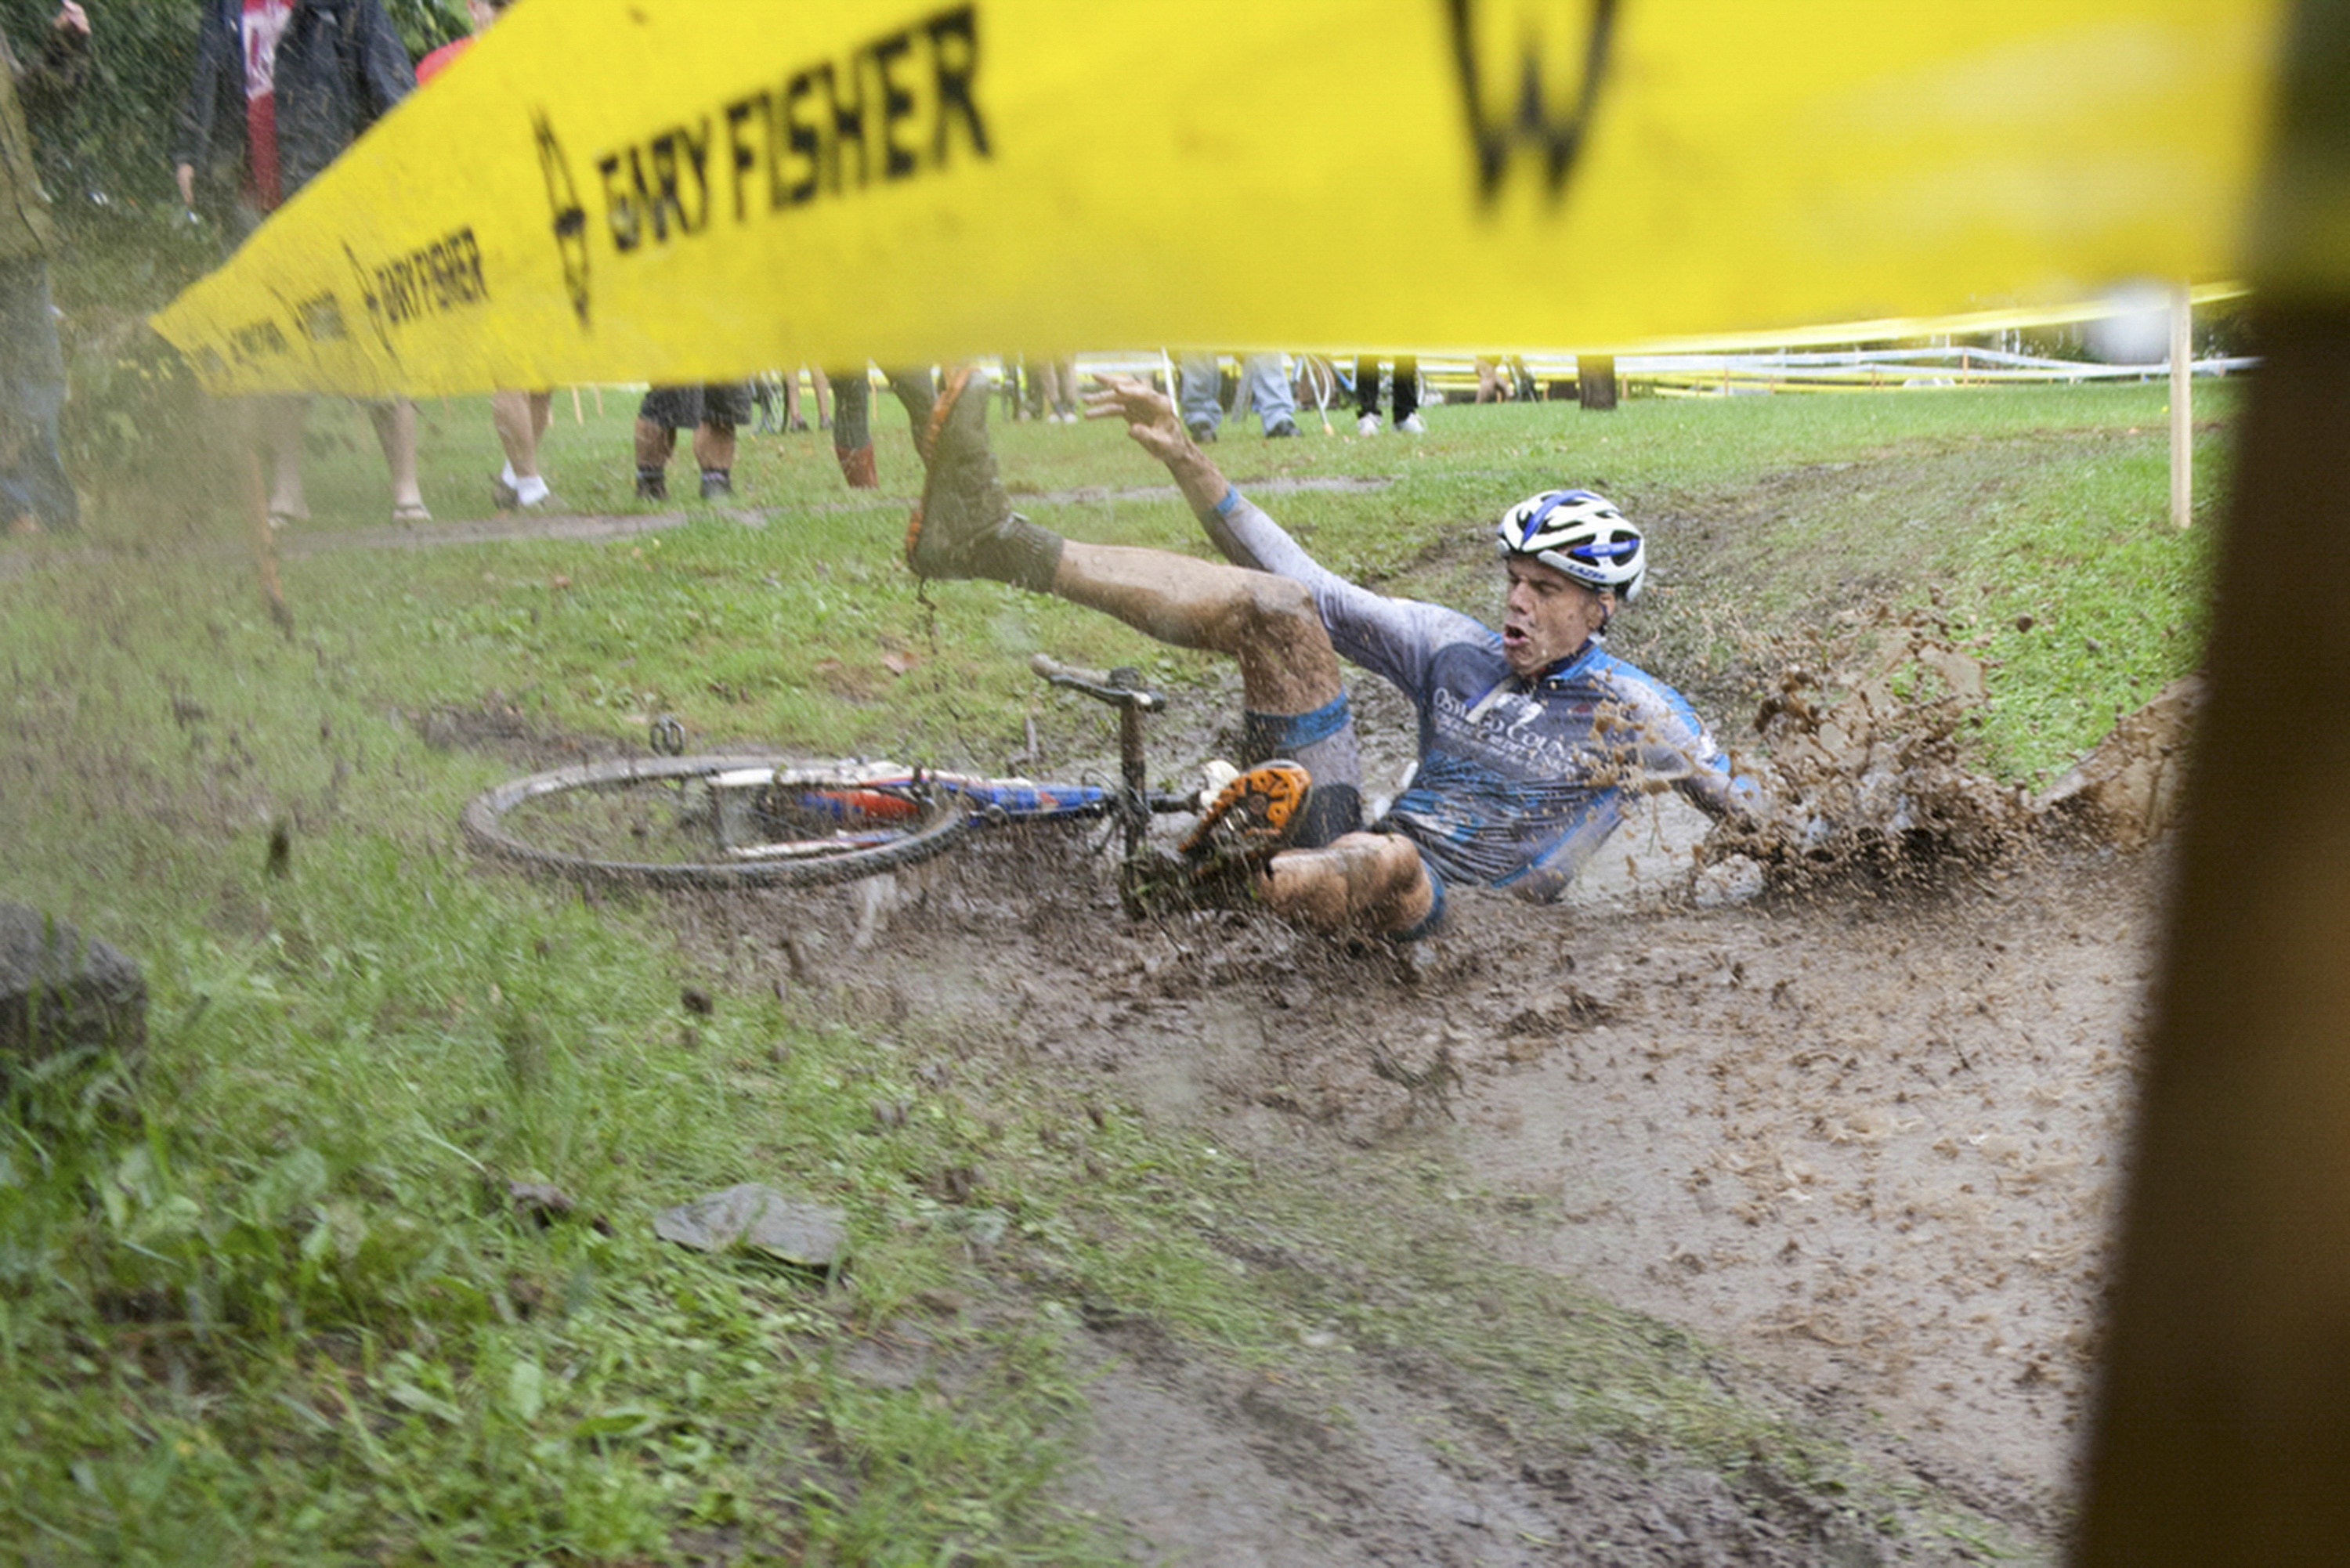 Gerald Visconti of the OCFCU Cycling Project takes a spill into a mud puddle during the Masters Men 40+ at the Cobb's Hill cyclocross race at Cobb's Hill Park on Sunday, Oct. 6, 2013. Cyclocross consists of many laps in which cyclists ride over pavement, grass, steep hills, and obstacles in which they quickly dismount and navigate the obstruction. "They changed the course last minute, I went right into the water. Whoosh!" said Visconti. Photo by Rugile Kaladyte